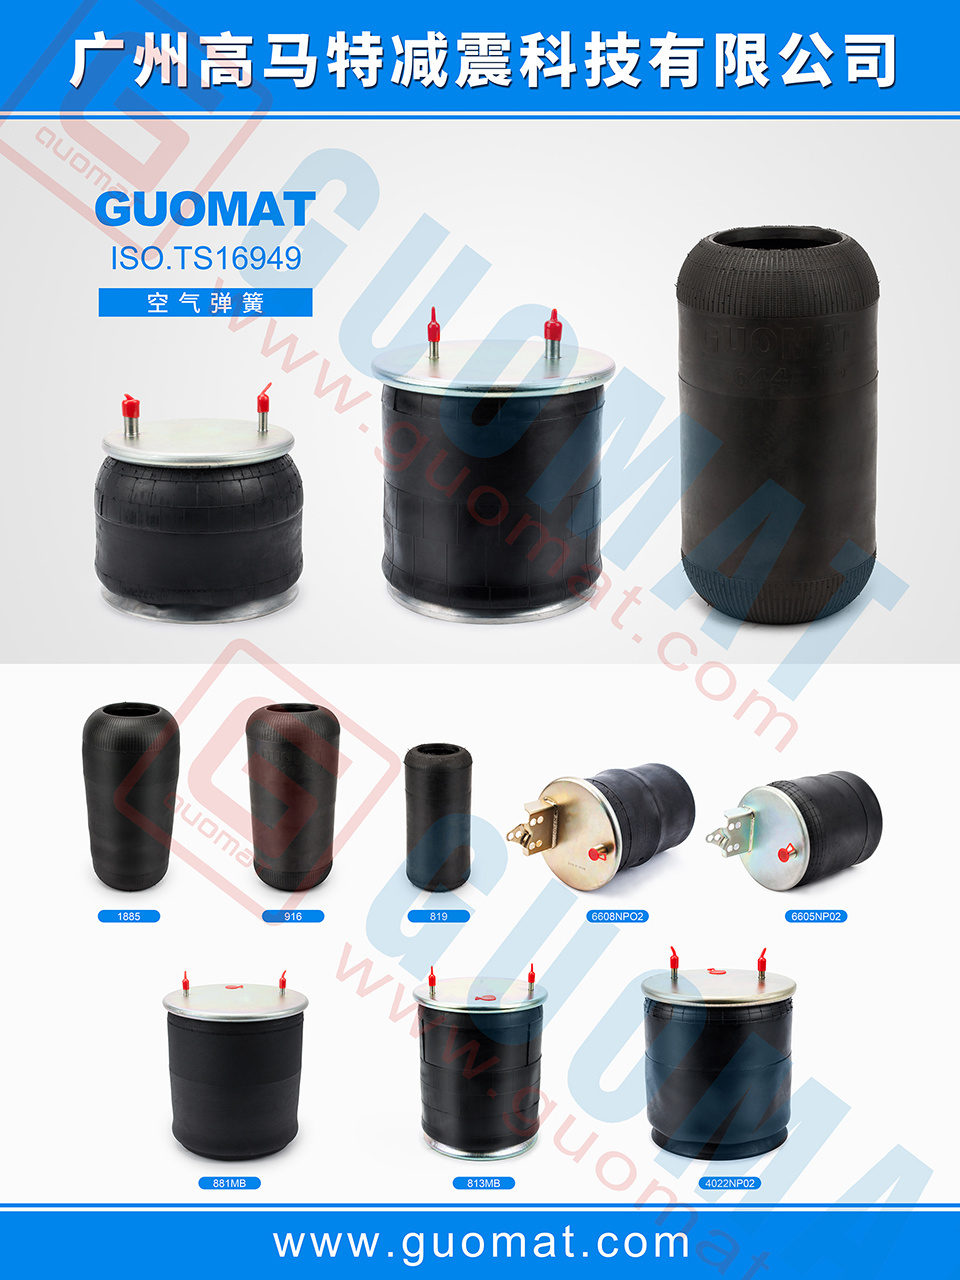 Guomat 1t9039 Refer to 1tw01-358-9039 Fire Stone Air Spring Bellows 1t15m-0 for Golden Dragon Yutong